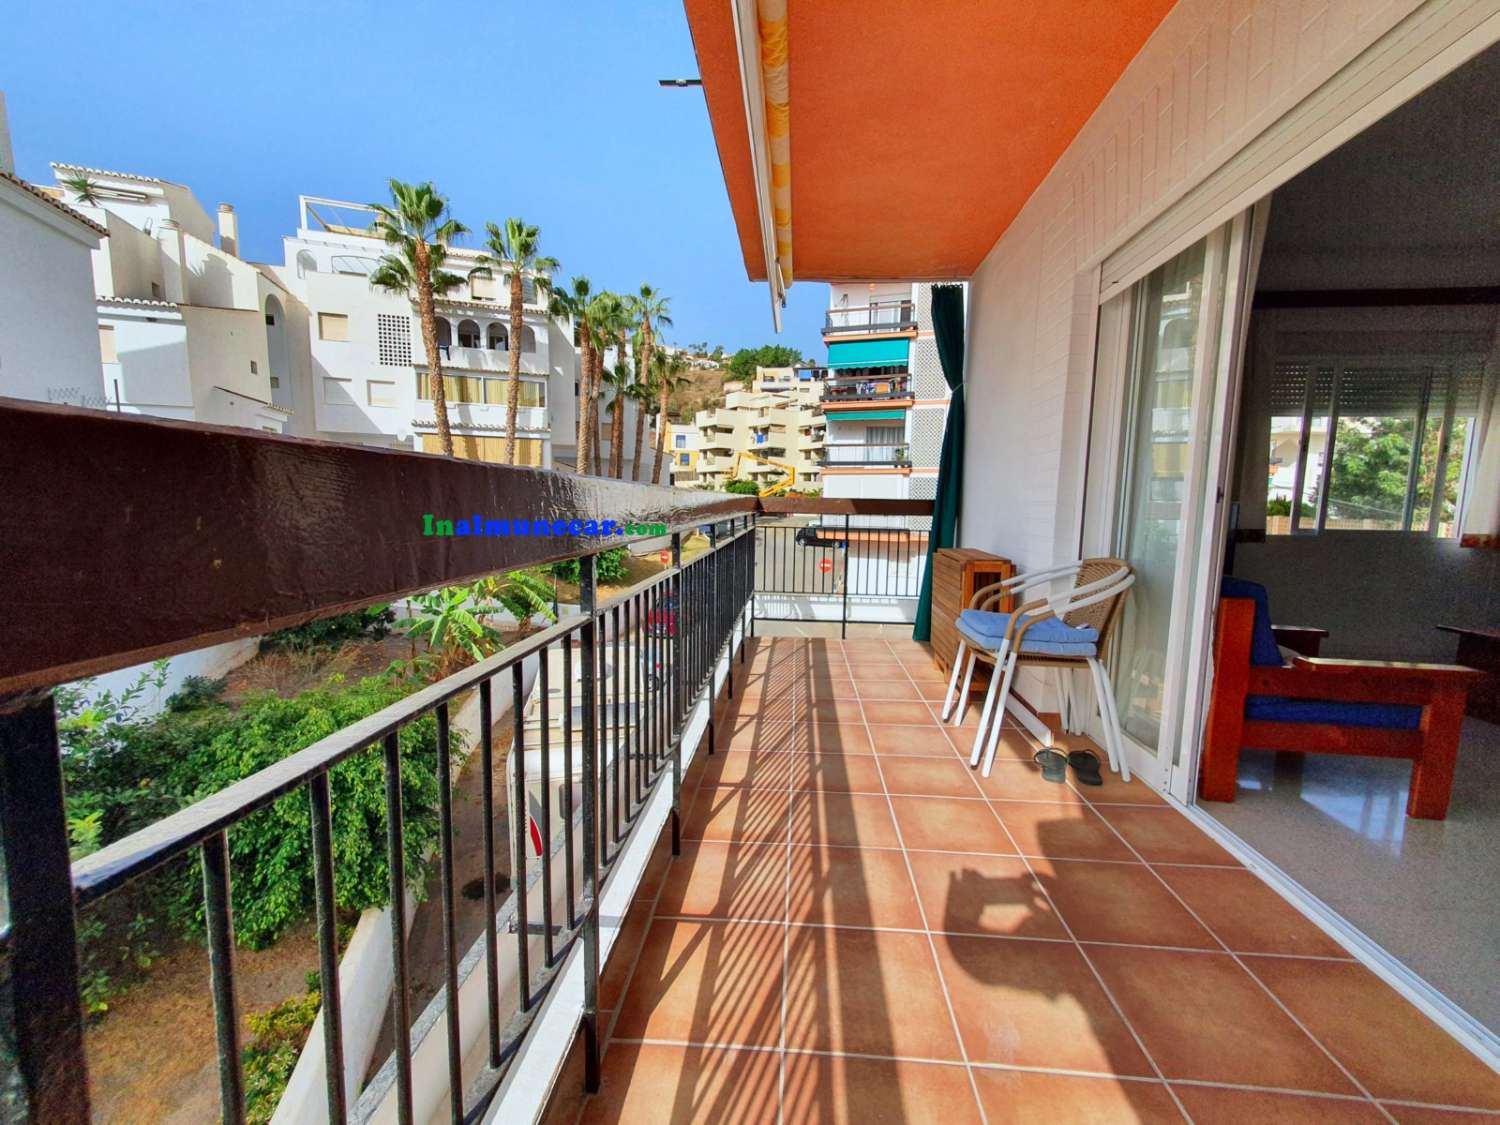 Renovated apartment for sale in Almuñecar located on the 2nd line of the beach with community parking.